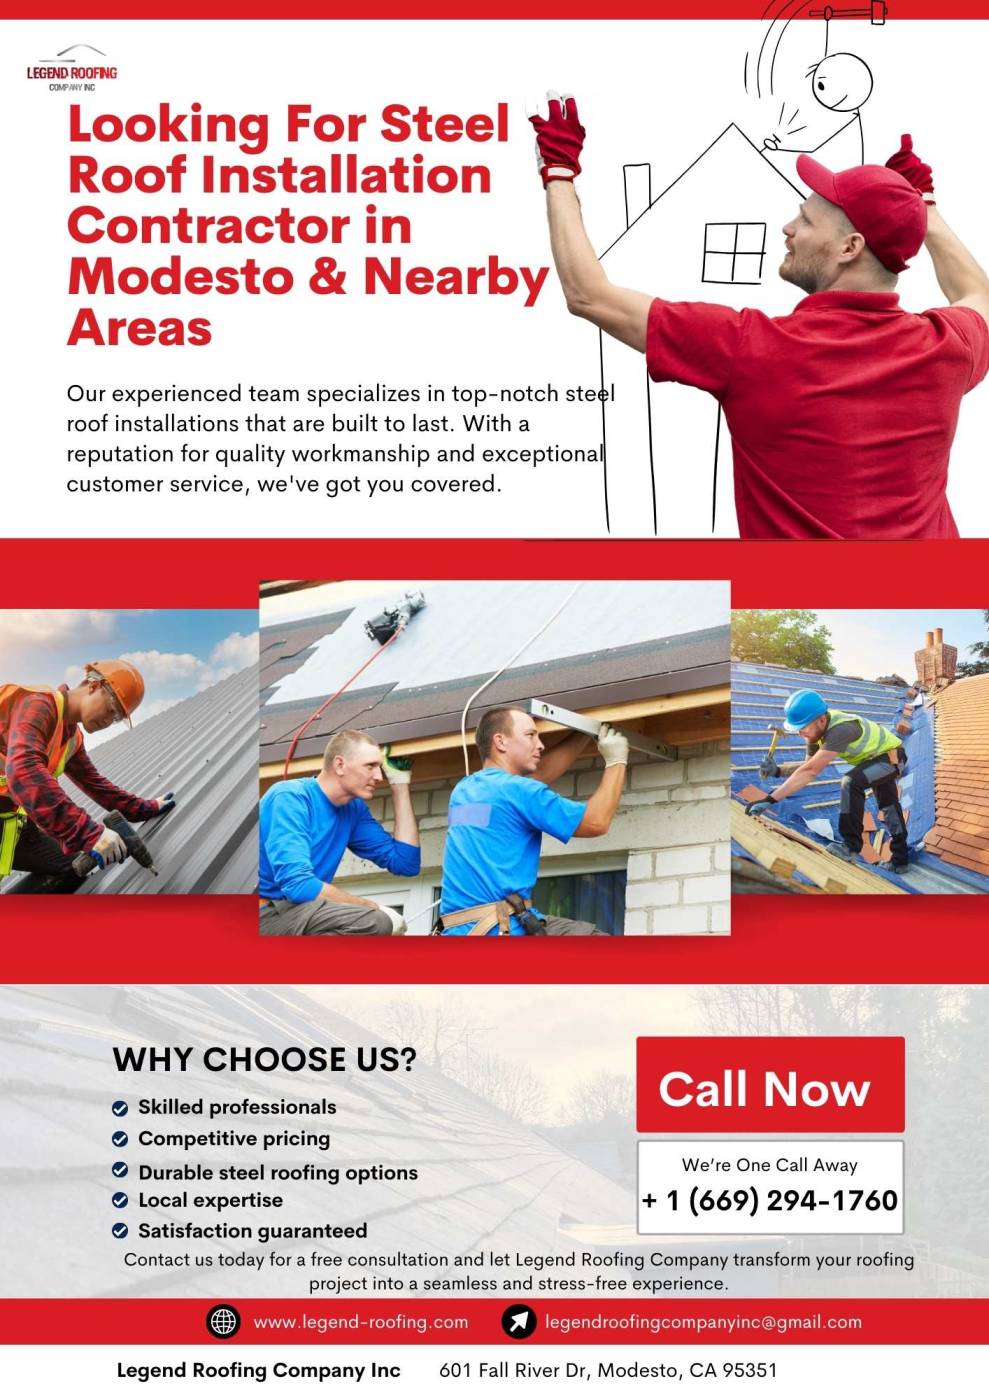 Looking for Steel Roof Installation Contractor in Modesto & Nearby Are,California,Services,Free Classifieds,Post Free Ads,77traders.com